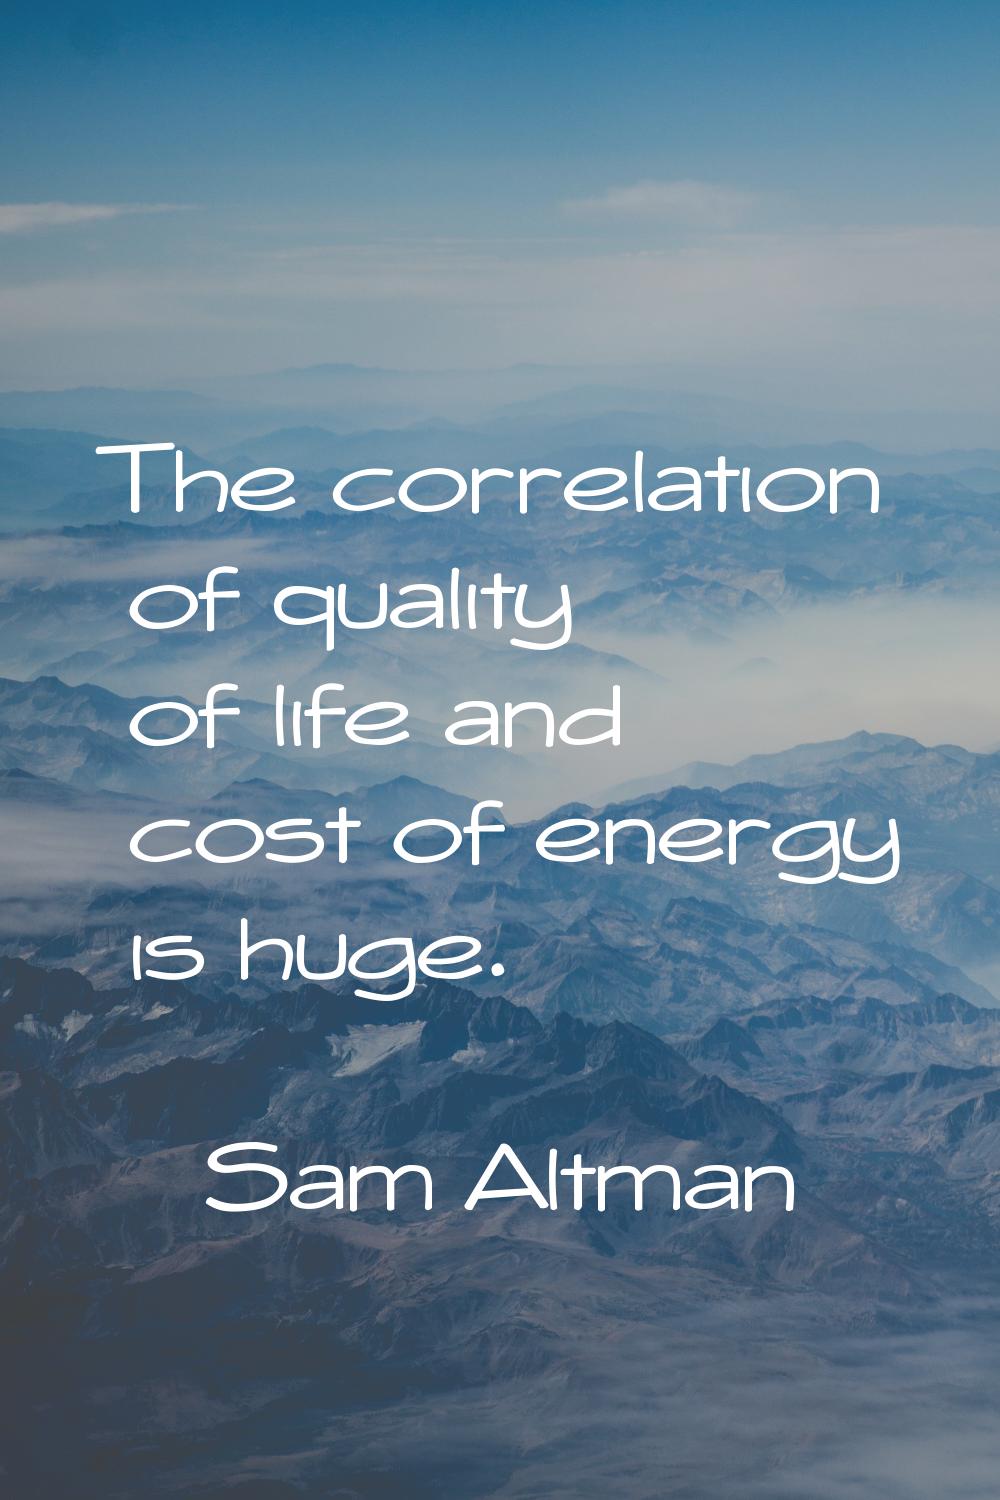 The correlation of quality of life and cost of energy is huge.